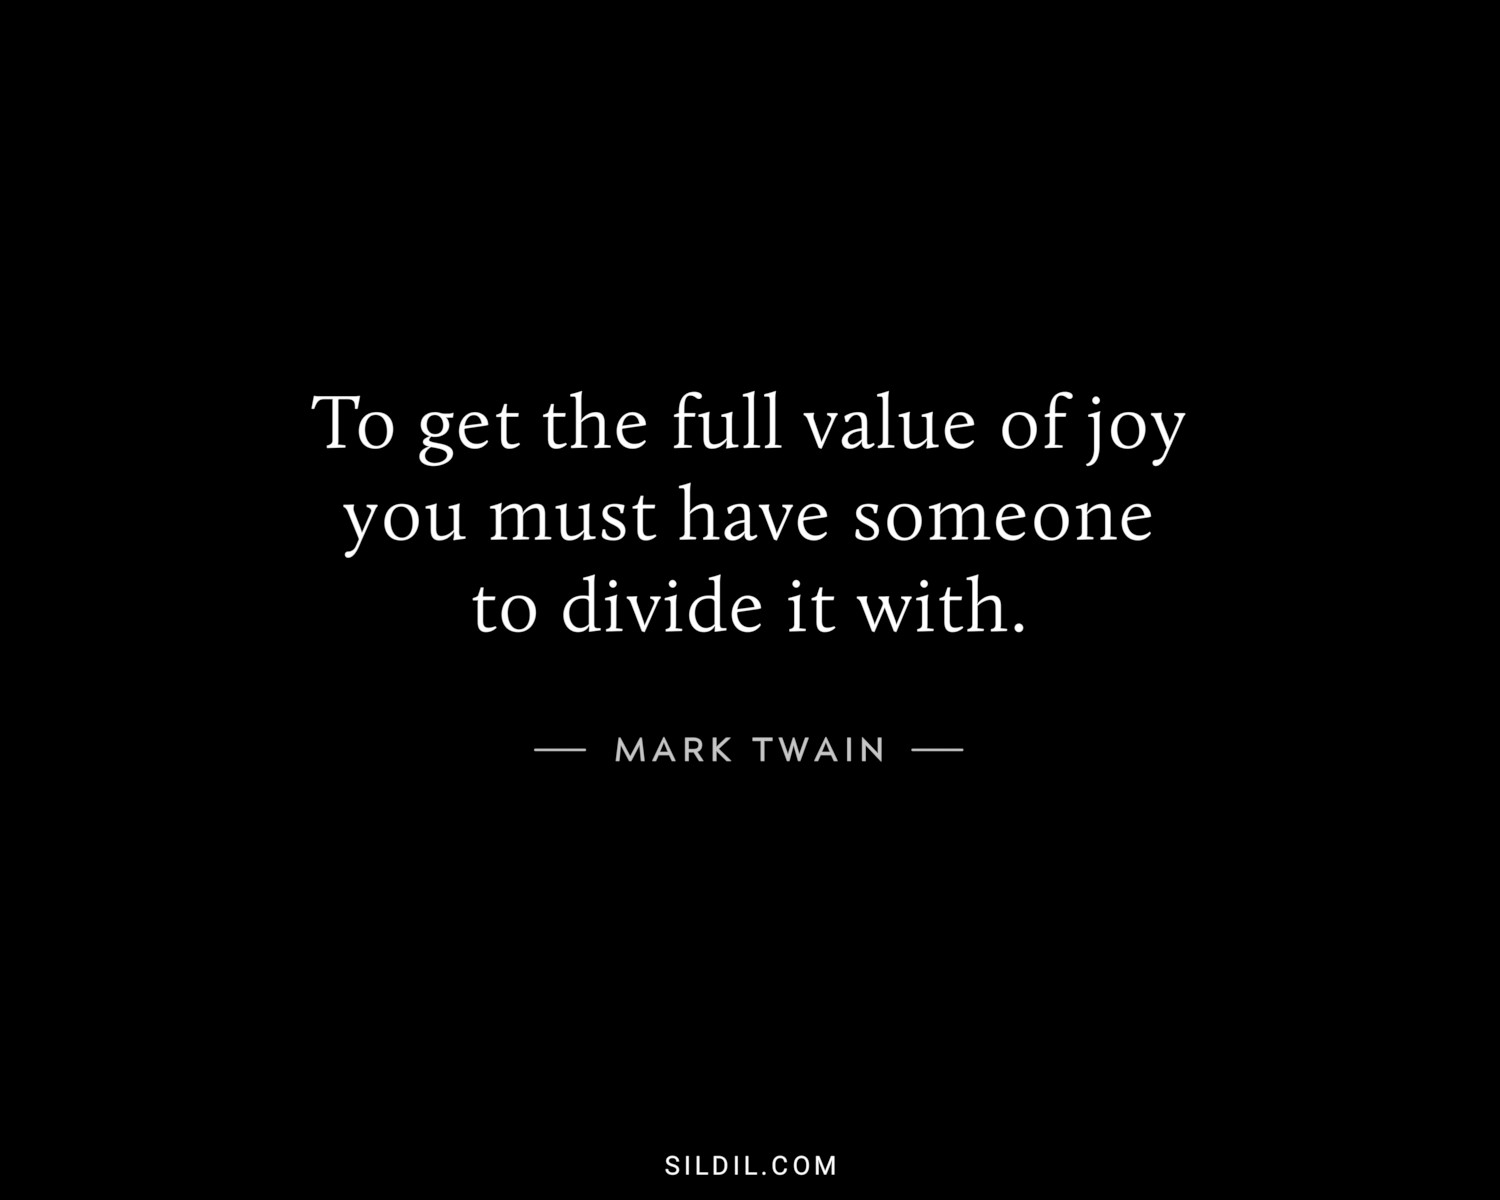 To get the full value of joy you must have someone to divide it with.